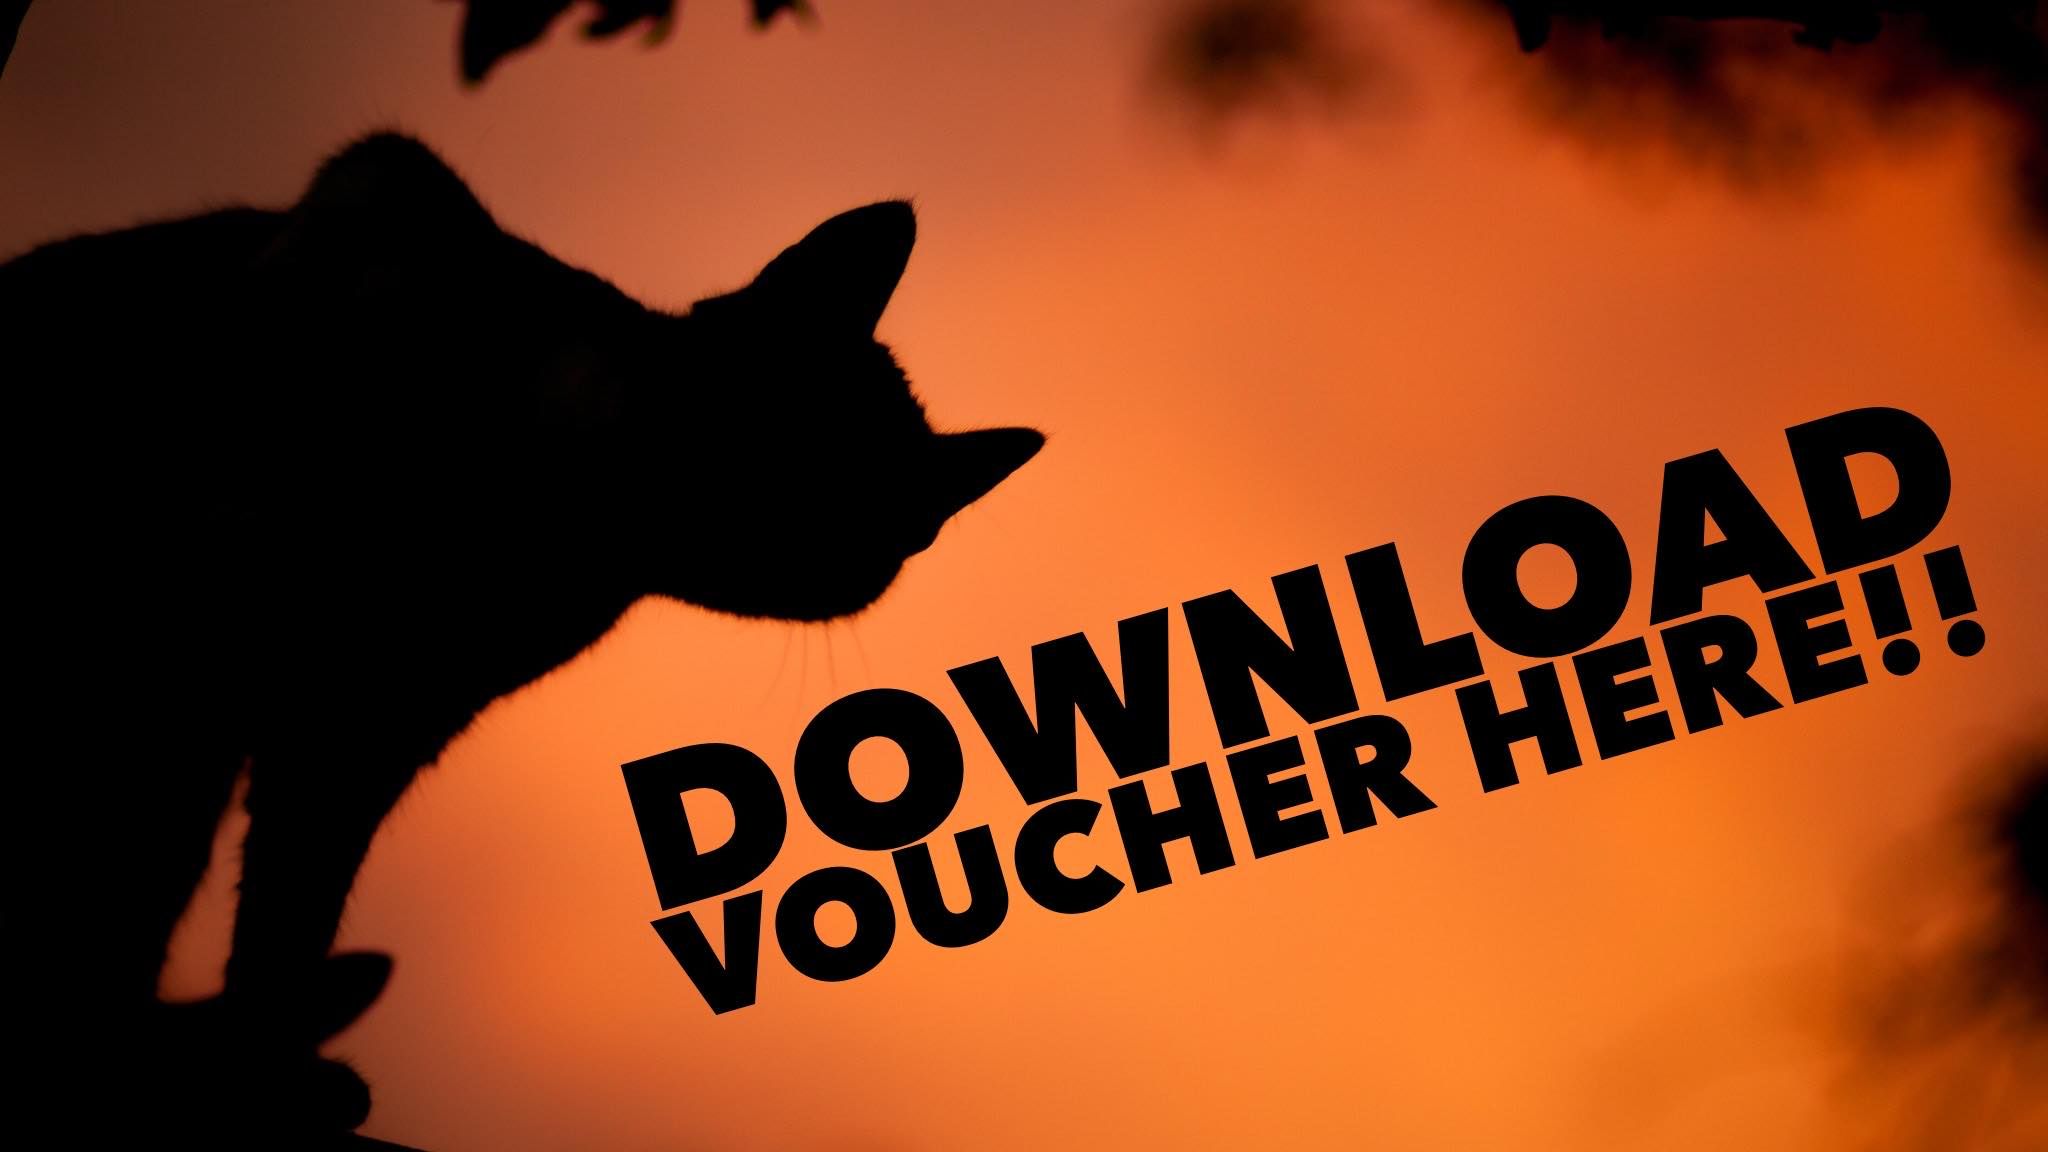 Image of black cat silhouetted in orange light with black text that reads "Download Vouchers Here"